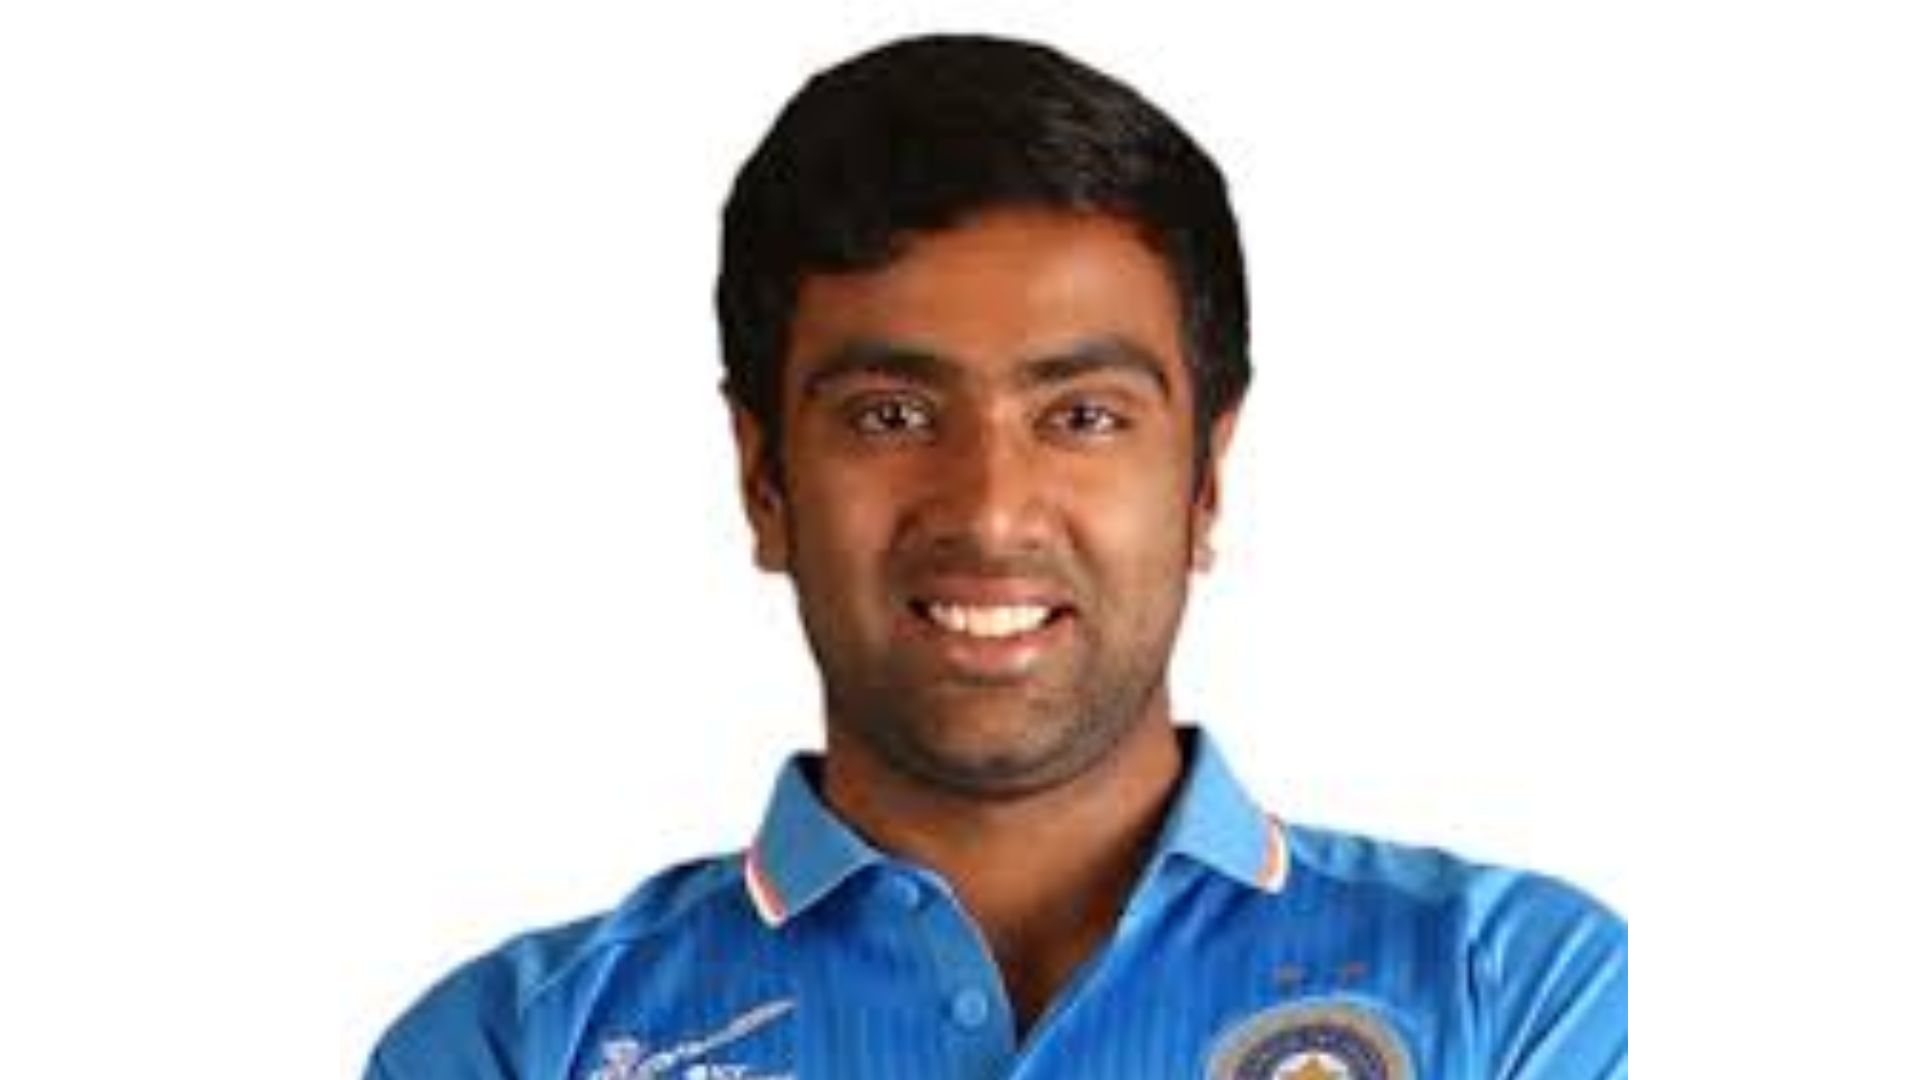 Ashwin attributed his success to unwavering support of his father